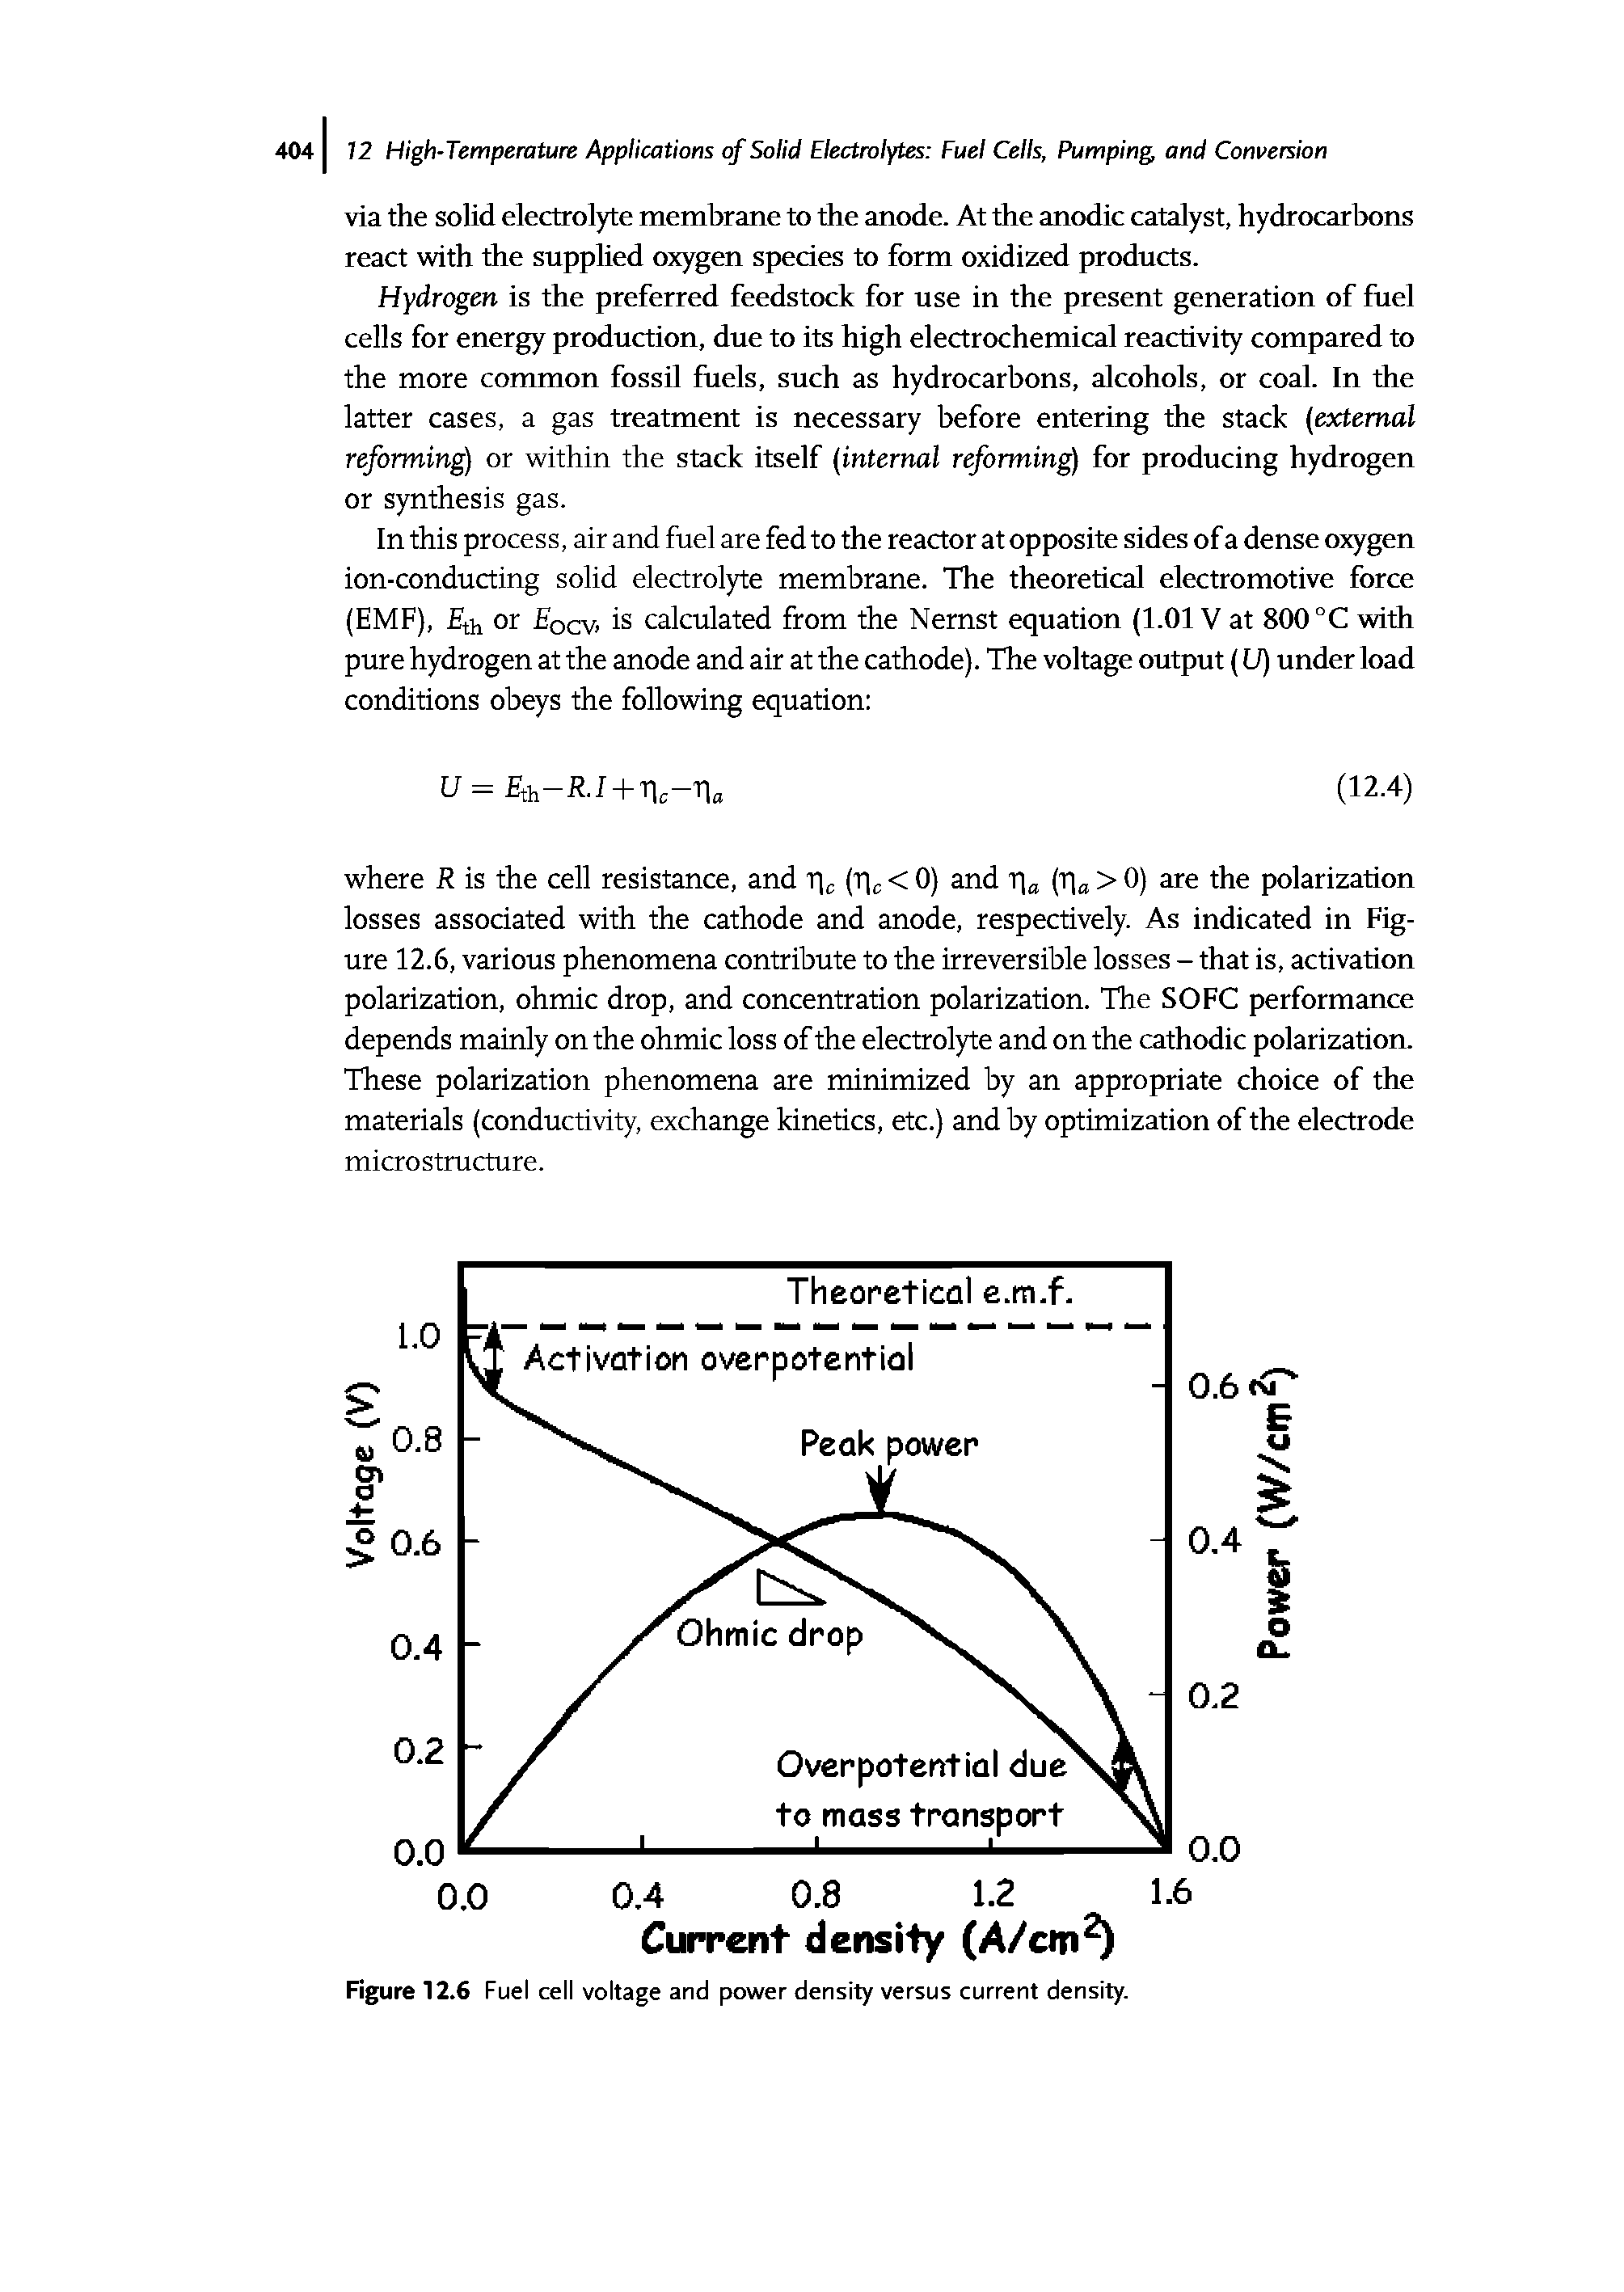 Figure 12.6 Fuel cell voltage and power density versus current density.